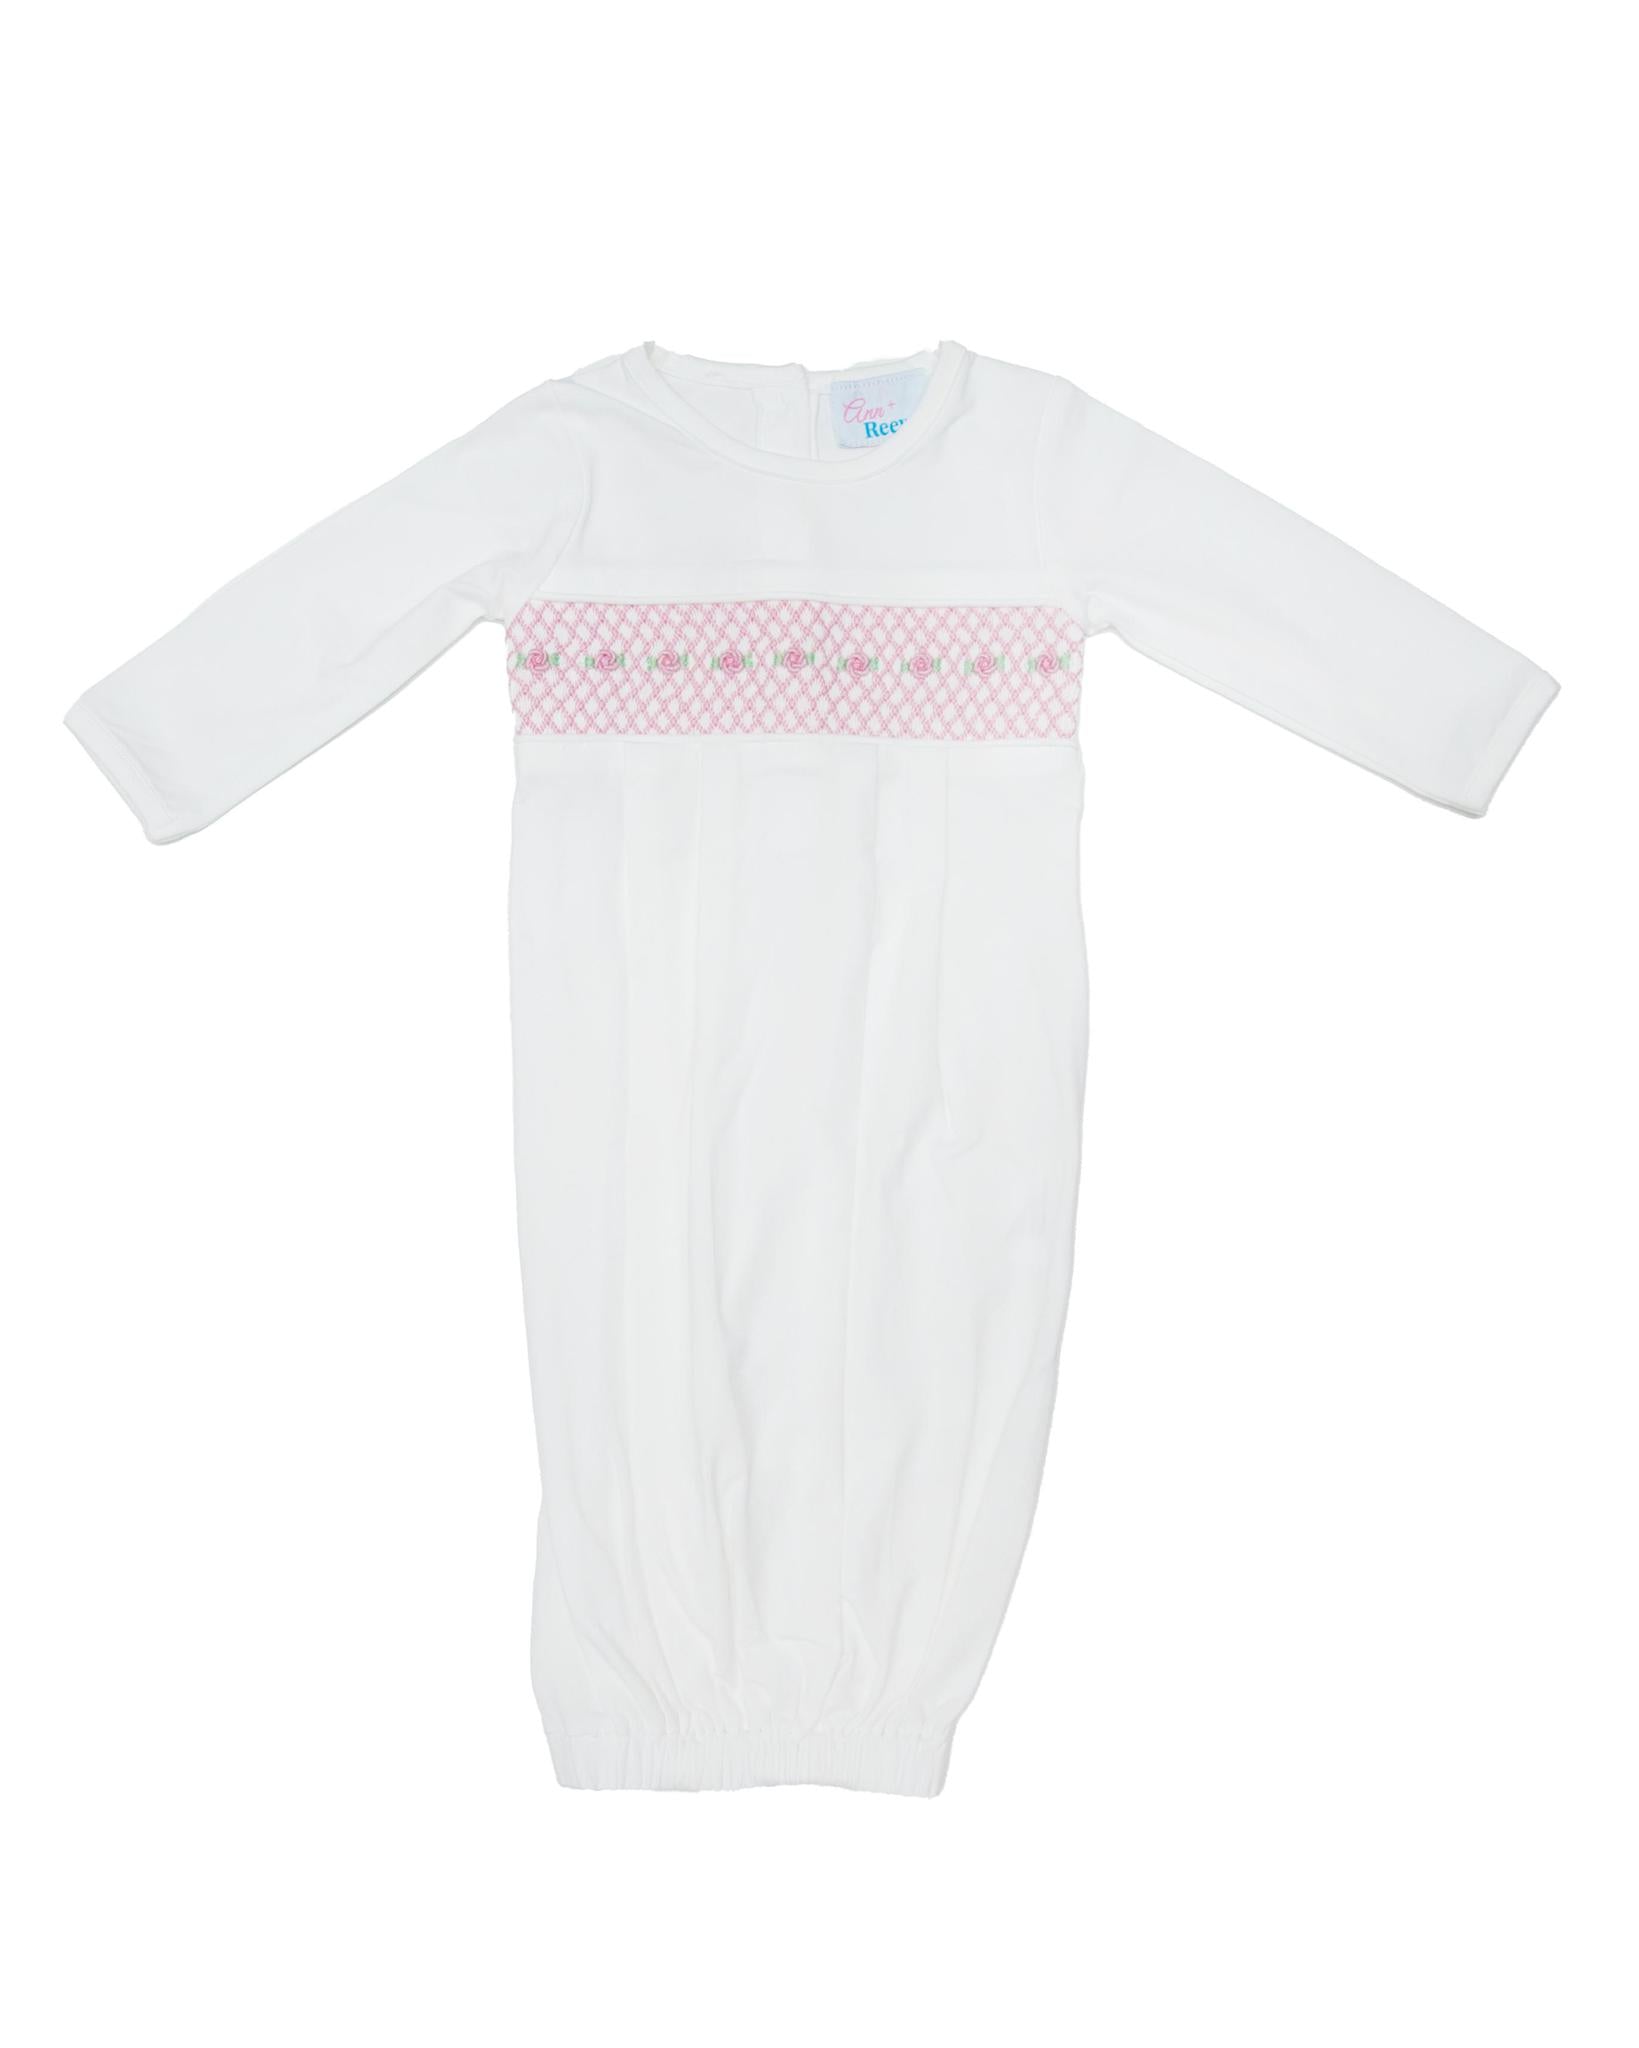 Sweet Girl - Baby Gown and Cap